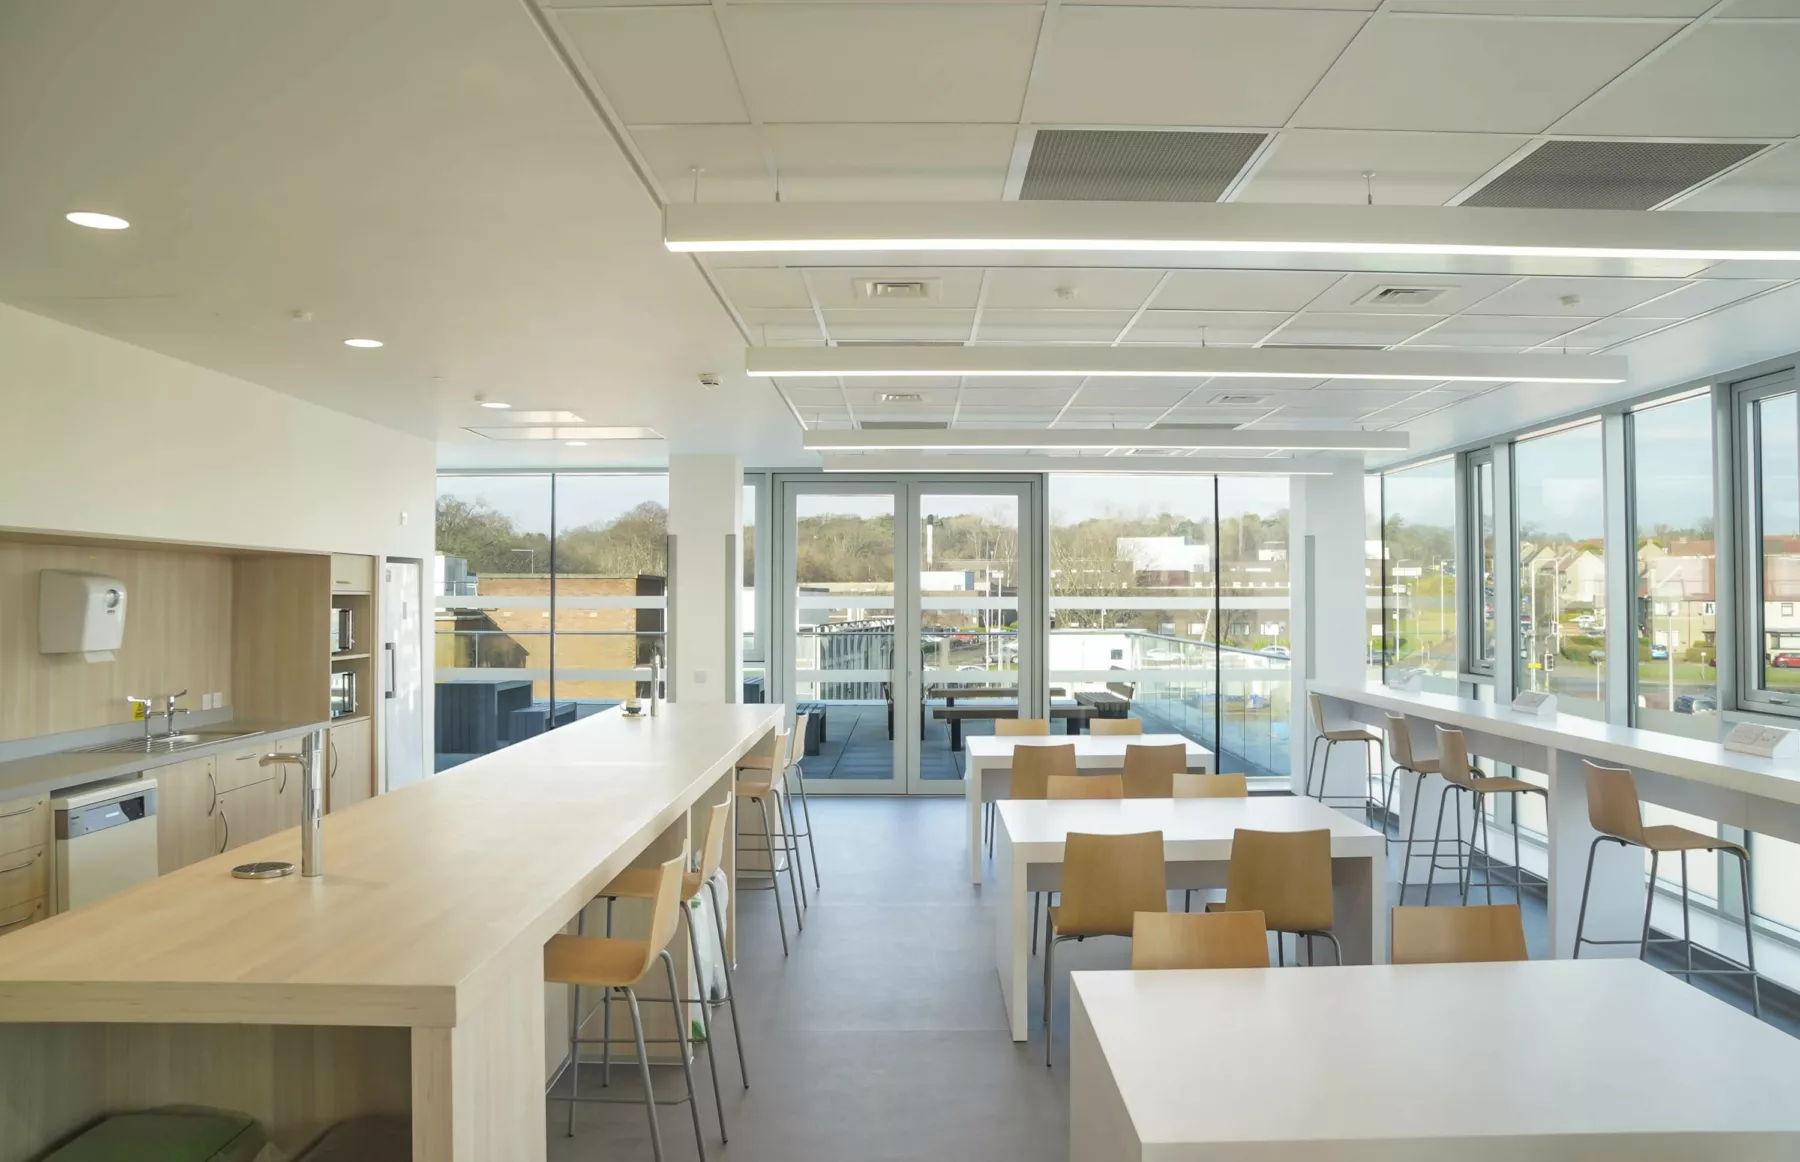 Staff kitchen and eating area at the National Treatment Centre - Fife Orthopaedics. Large windows on two sides, tables and chairs at varying heights in the bright and clean space.